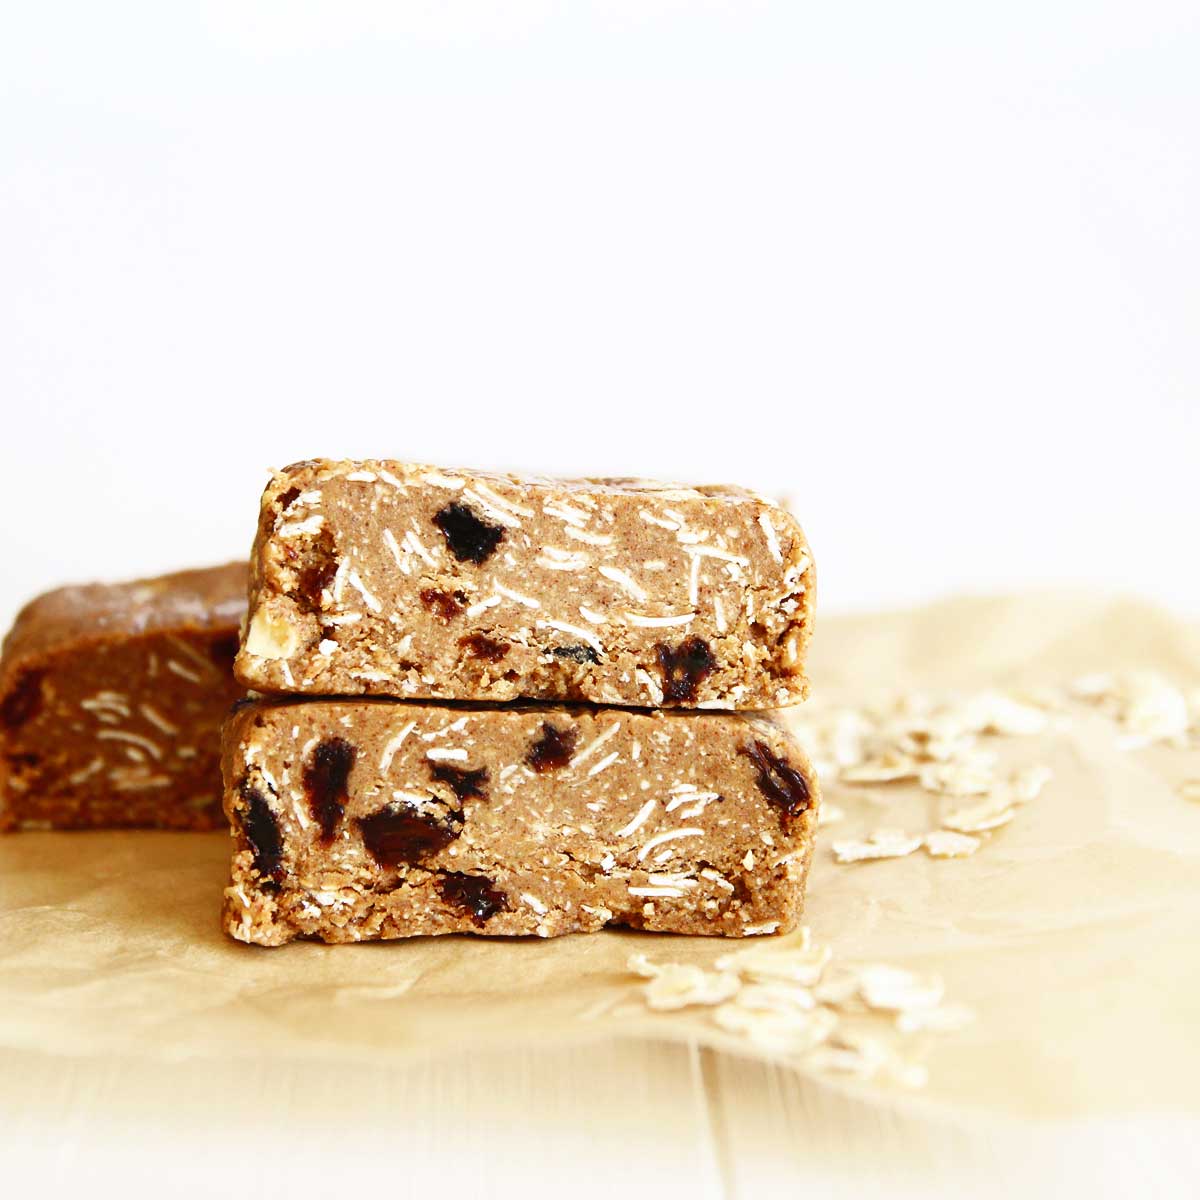 10-Minute Chocolate Peanut Butter Oatmeal Protein Bars - Chocolate Peanut Butter Oatmeal Protein Bars